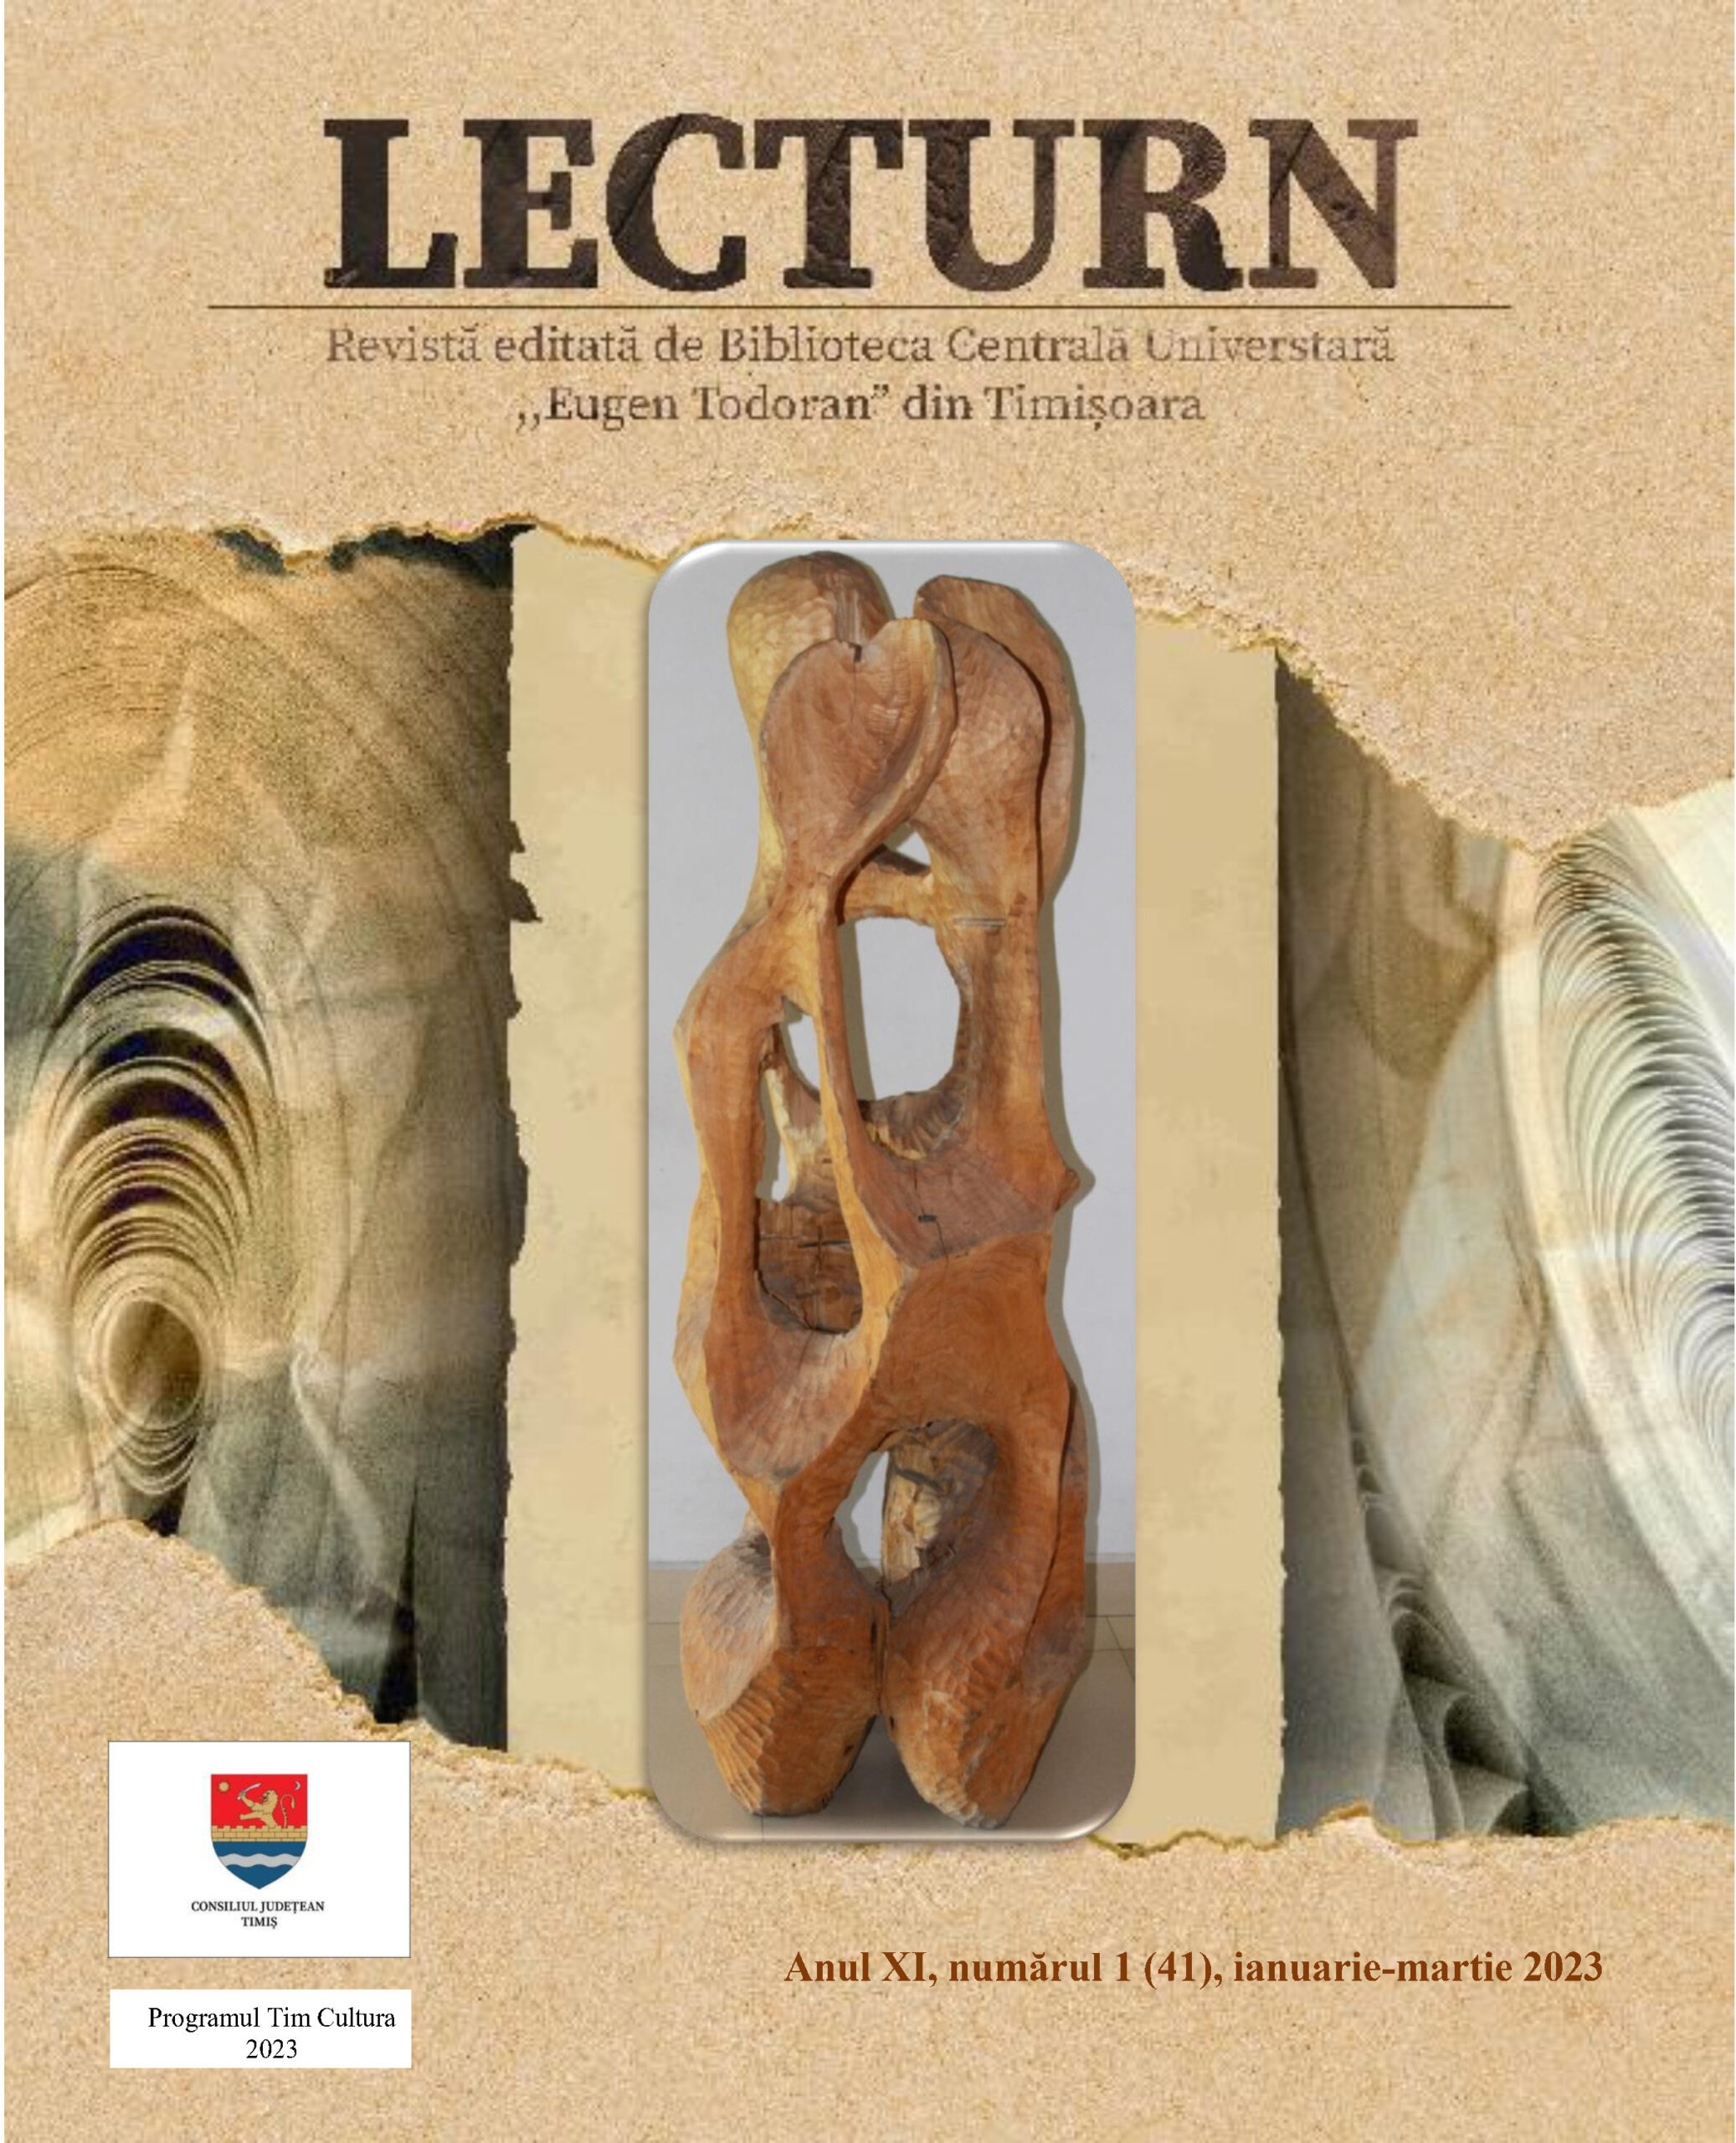 Cultural programs of the Central University Library “Eugen Todoran" in Timisoara (October-December 2022) Cover Image